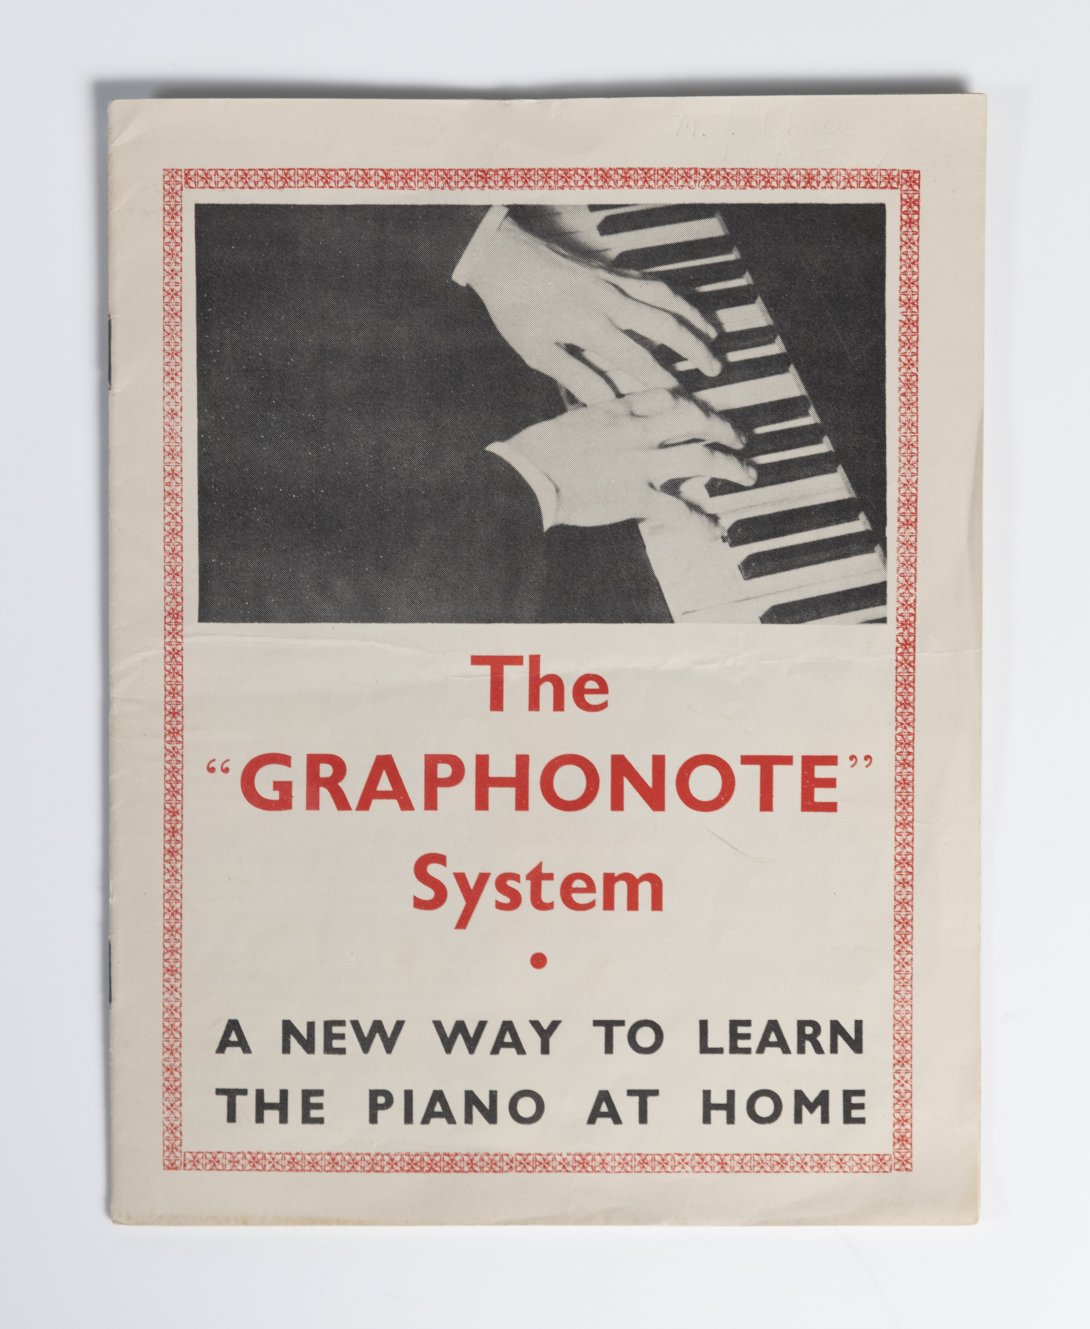 Closed booklet featuring red and black letters below an image of two hands playing a piano.